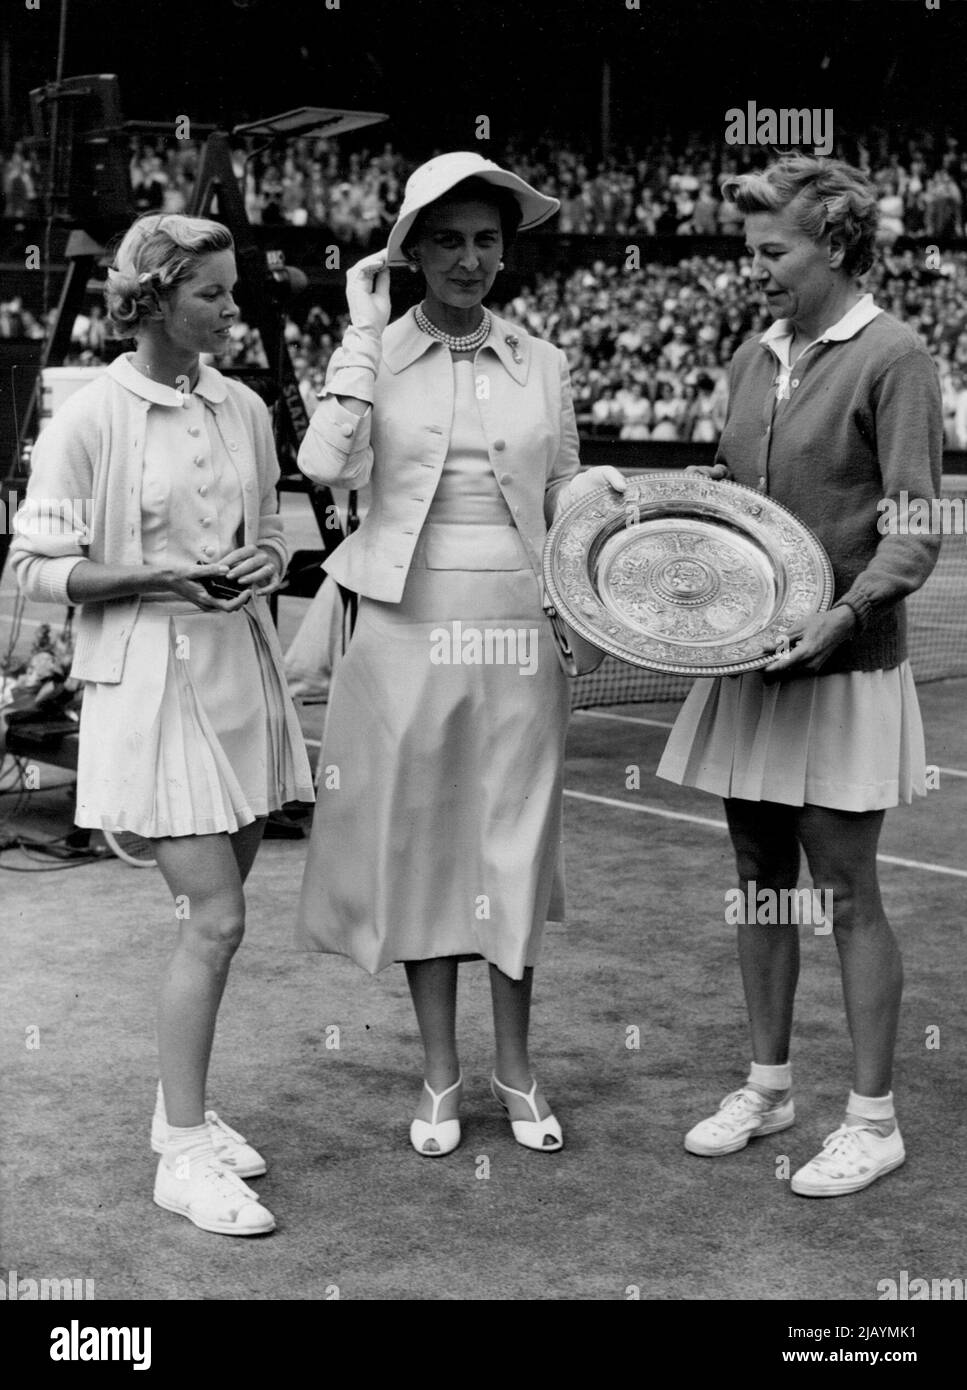 Royal Presentation - HRH The Duchess of Kent presents the singles trophy to Louise Brough. On left is Mrs. Beverley Fleitz. Louise Brough (USA) won the Wimbledon ingles titles for the fourth time today when she beat fellow country woman, Mrs. Beverley Baker Fleitz. July 02, 1955. (Photo by Paul Popper, Paul Popper Ltd.). Stock Photo